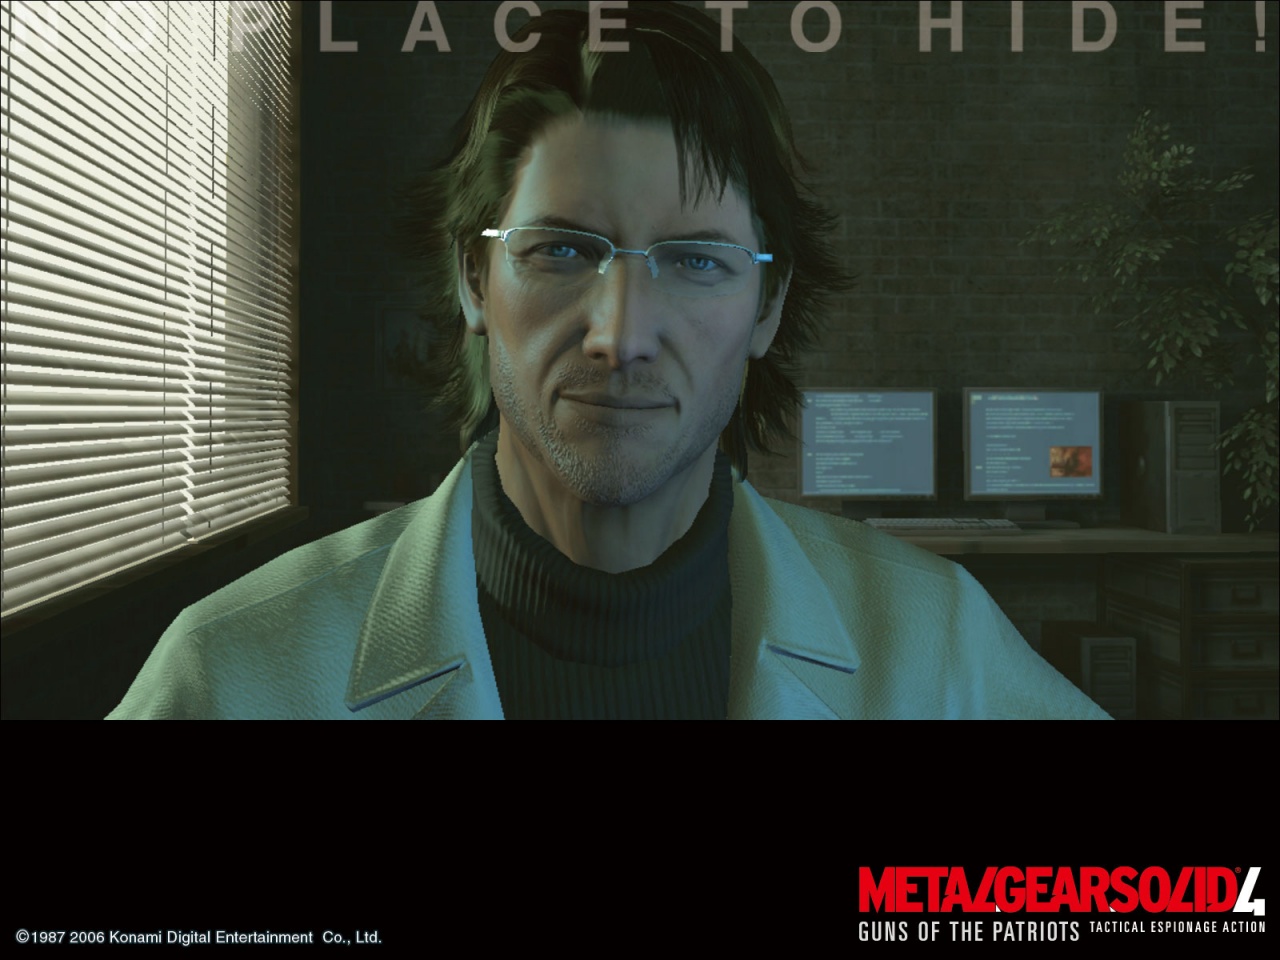 Metal Gear Solid 4 - No place to hide